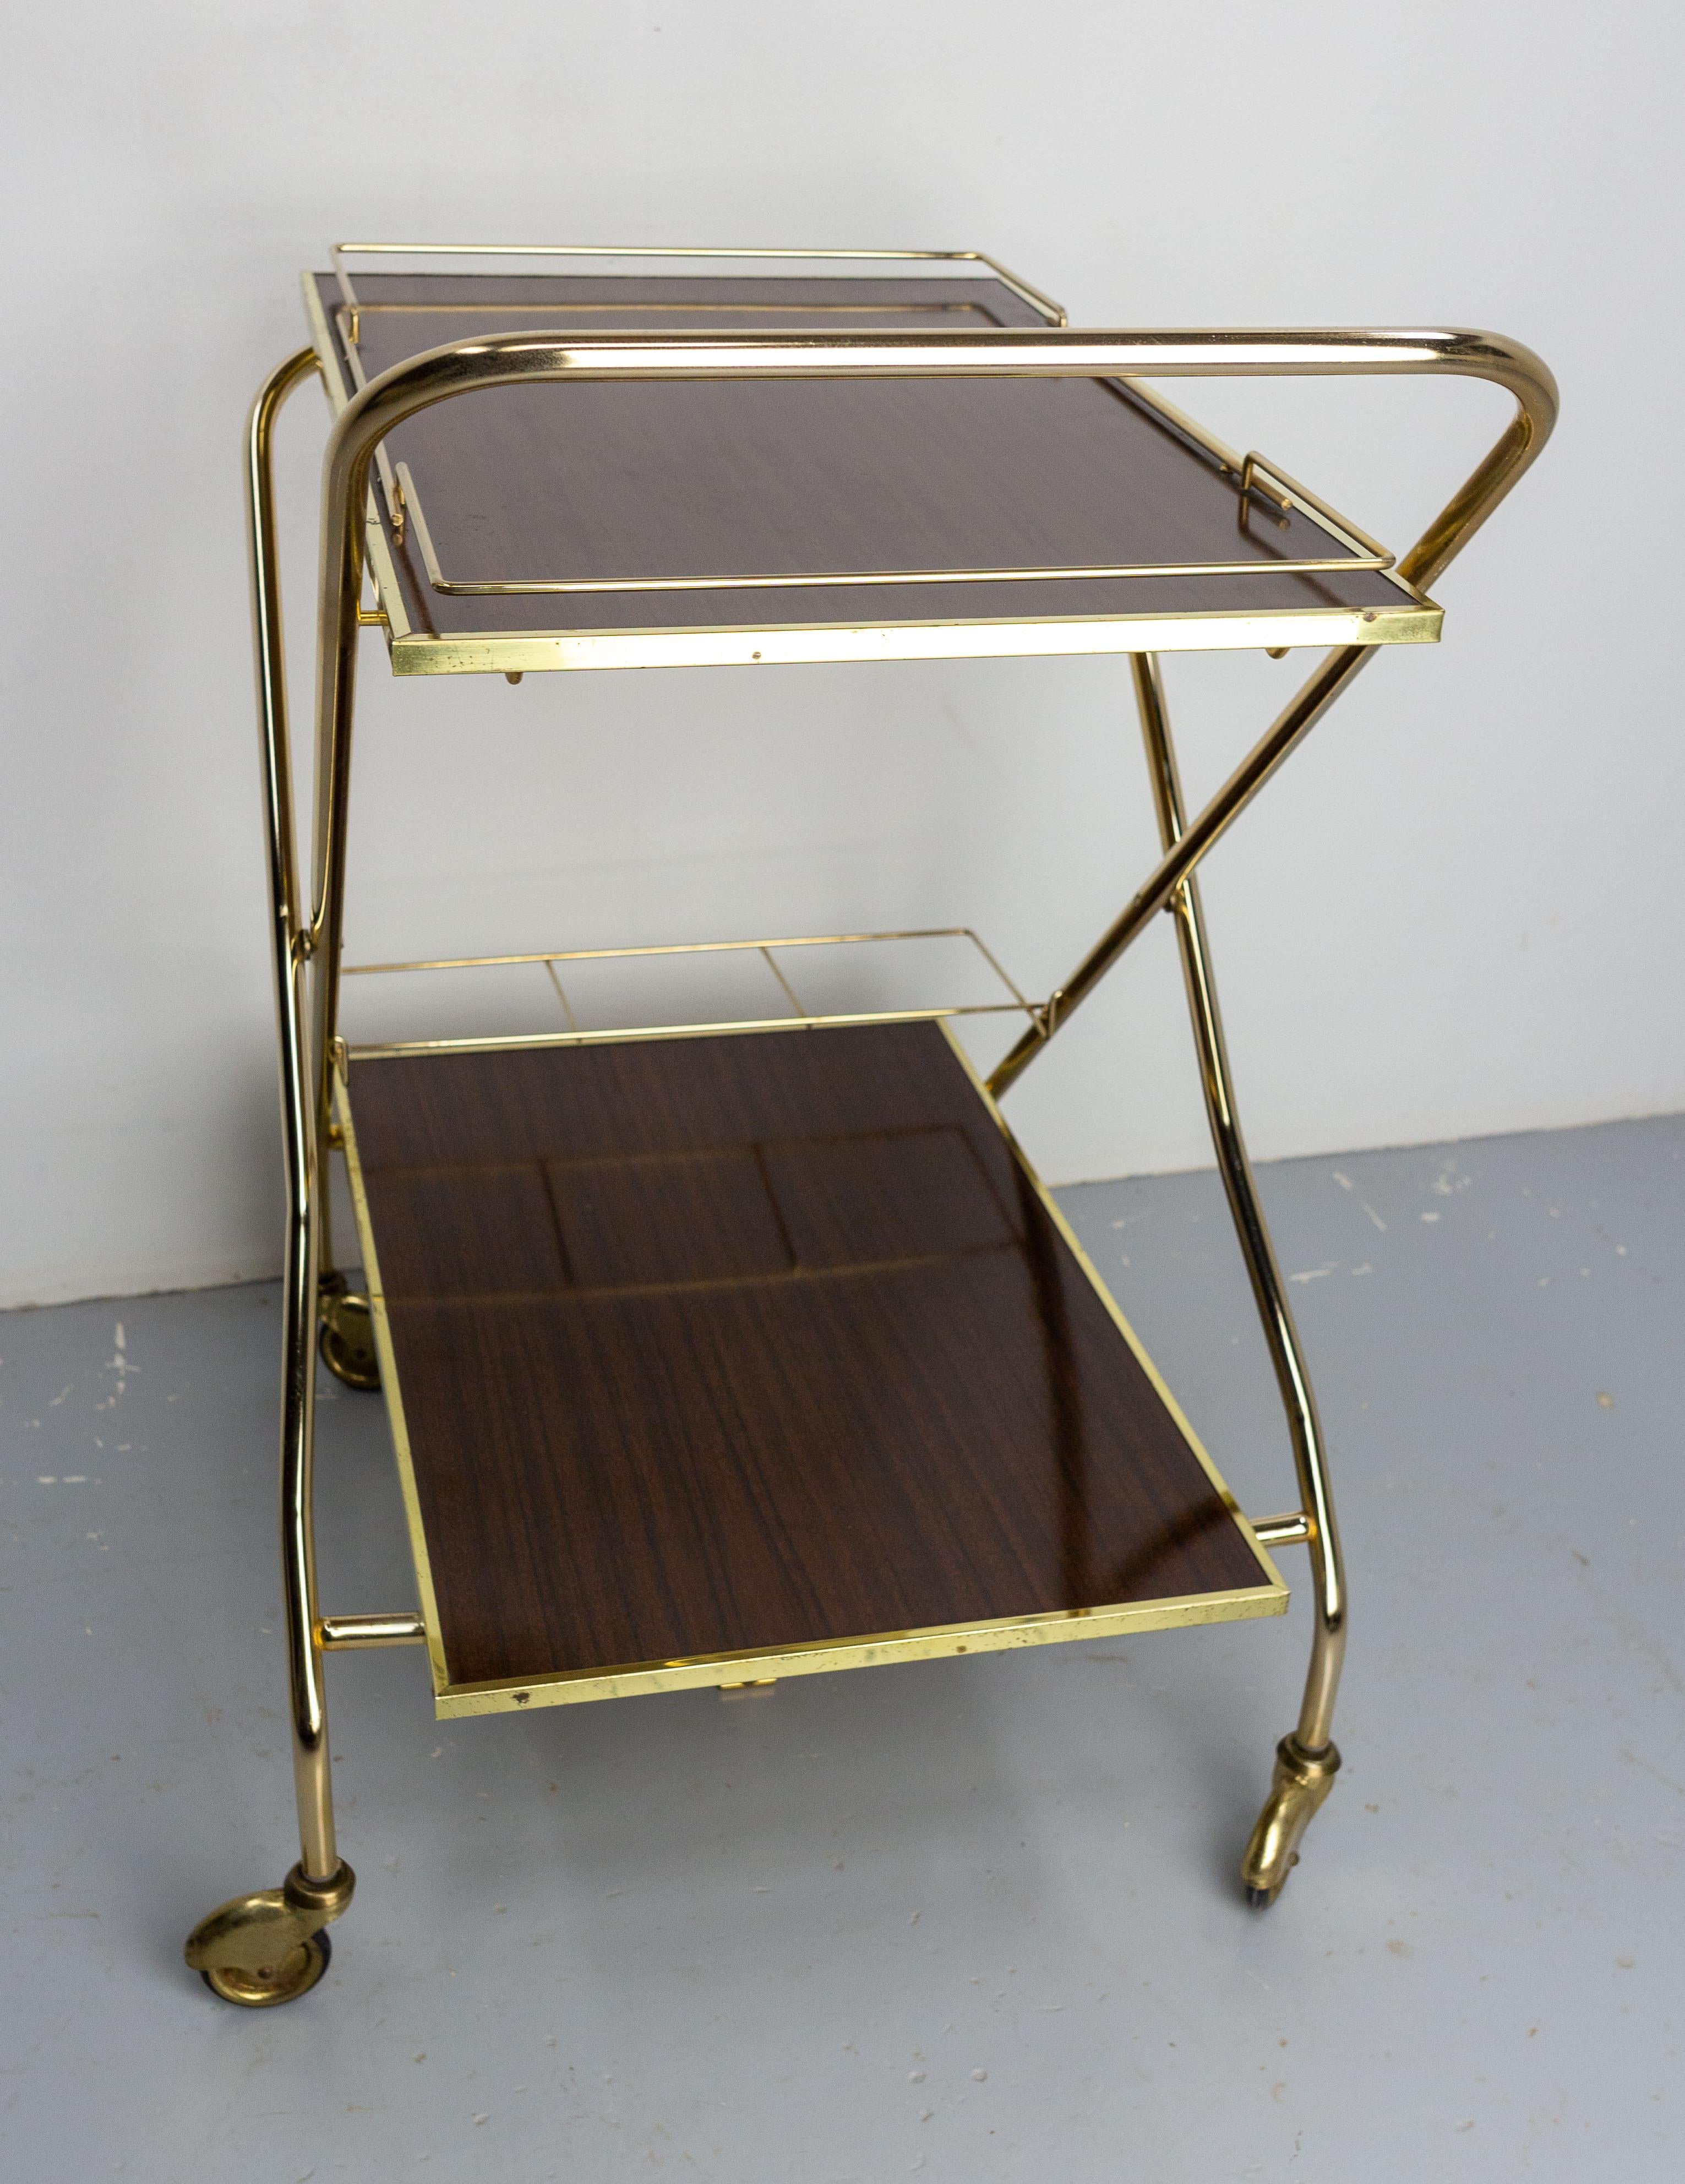 French Midcentury Foldable Trolley Chrome and Stratified Wood, circa 1970